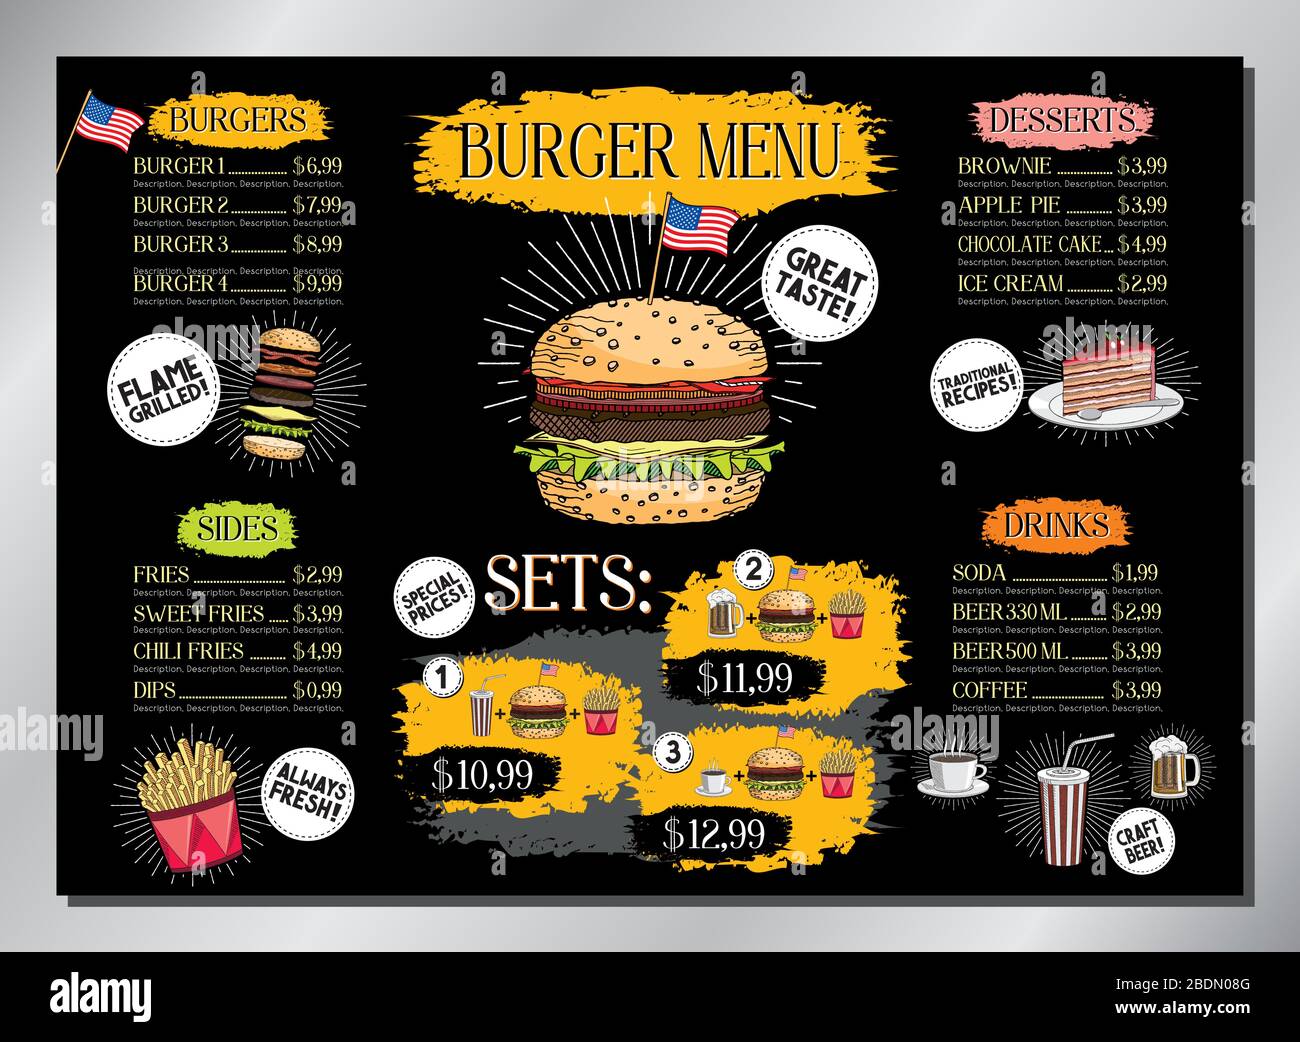 Burger bar card template - table menu (burgers, french fries, desserts, drinks, sets) - A3 size (420x297 mm) Stock Vector